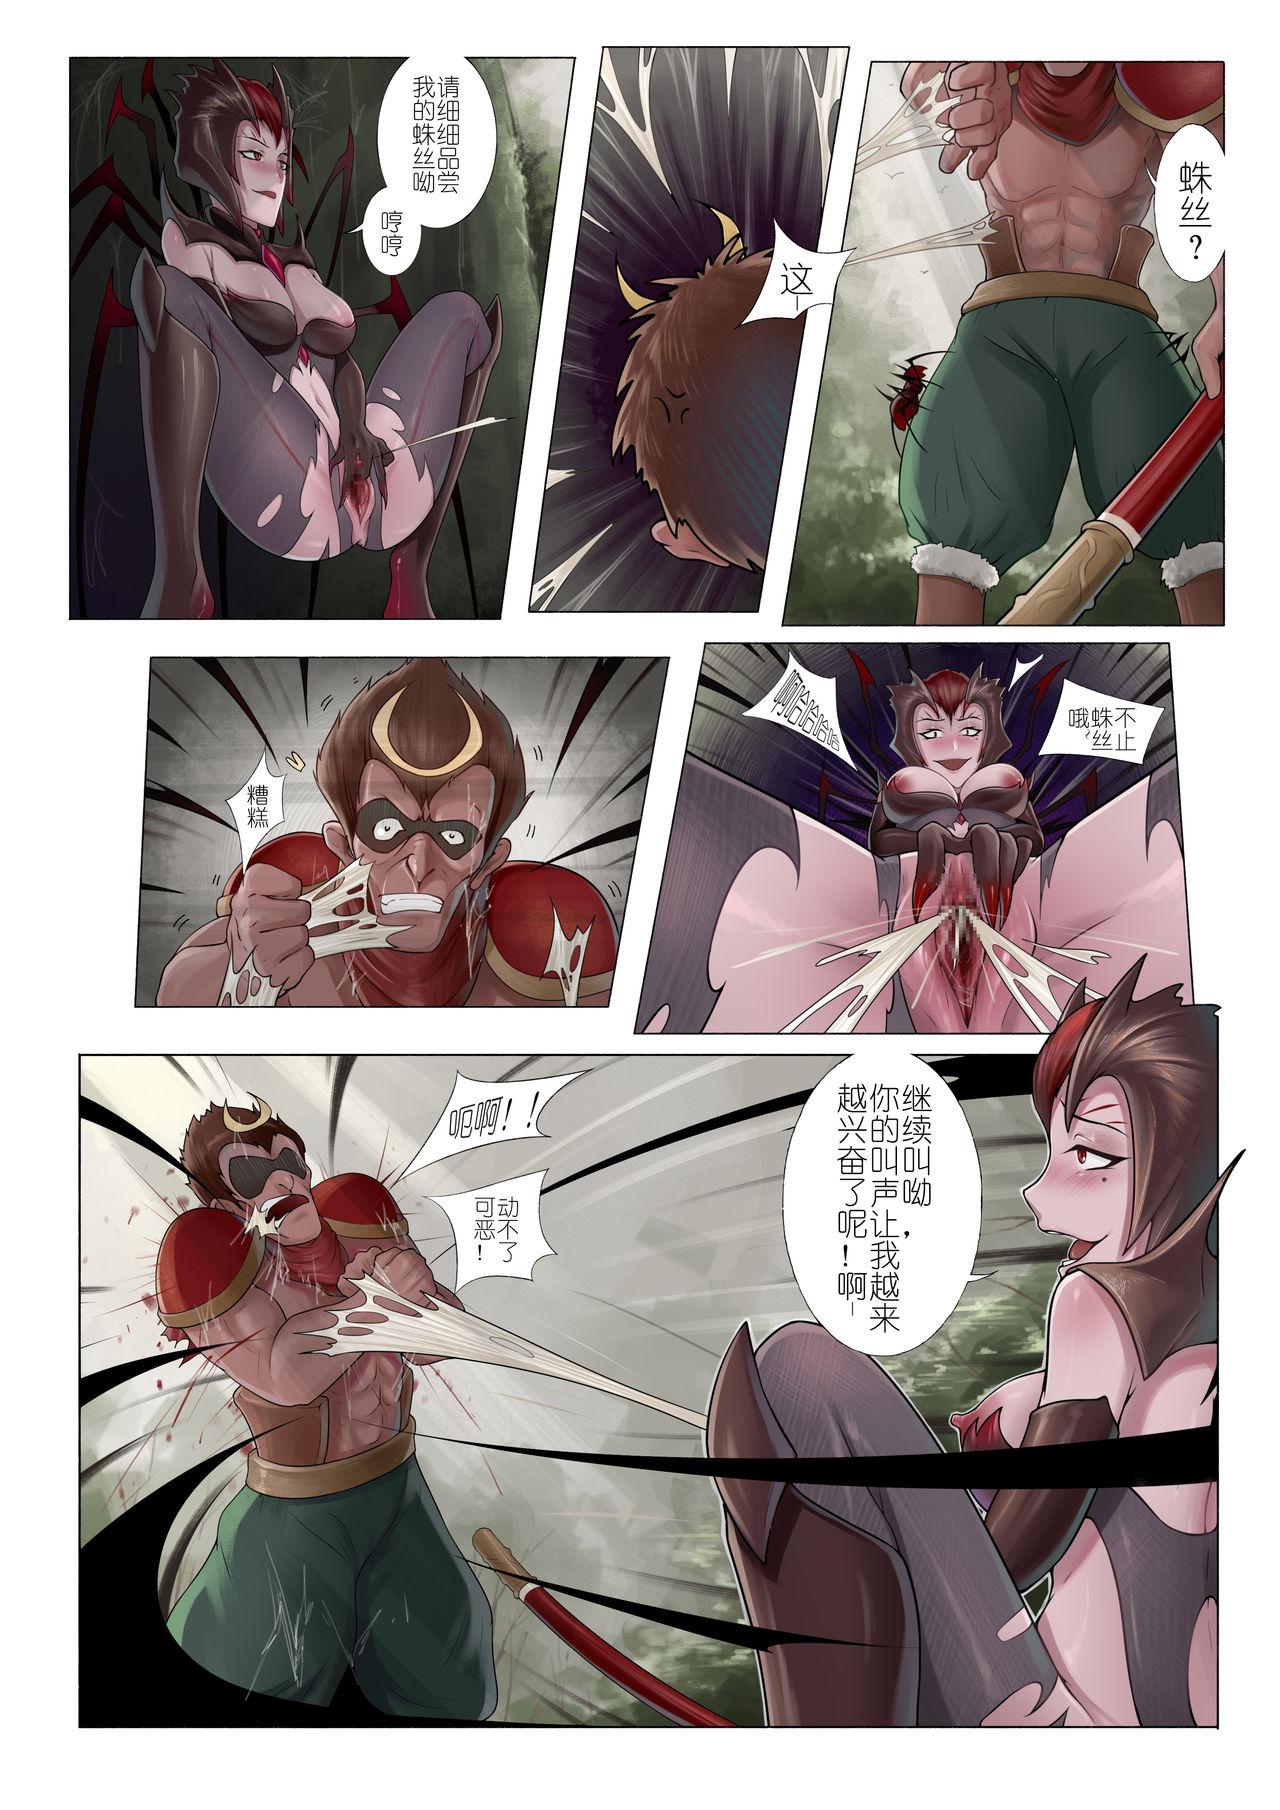 Harcore 恶女退治2蜘蛛女皇 - League of legends Ginger - Page 5